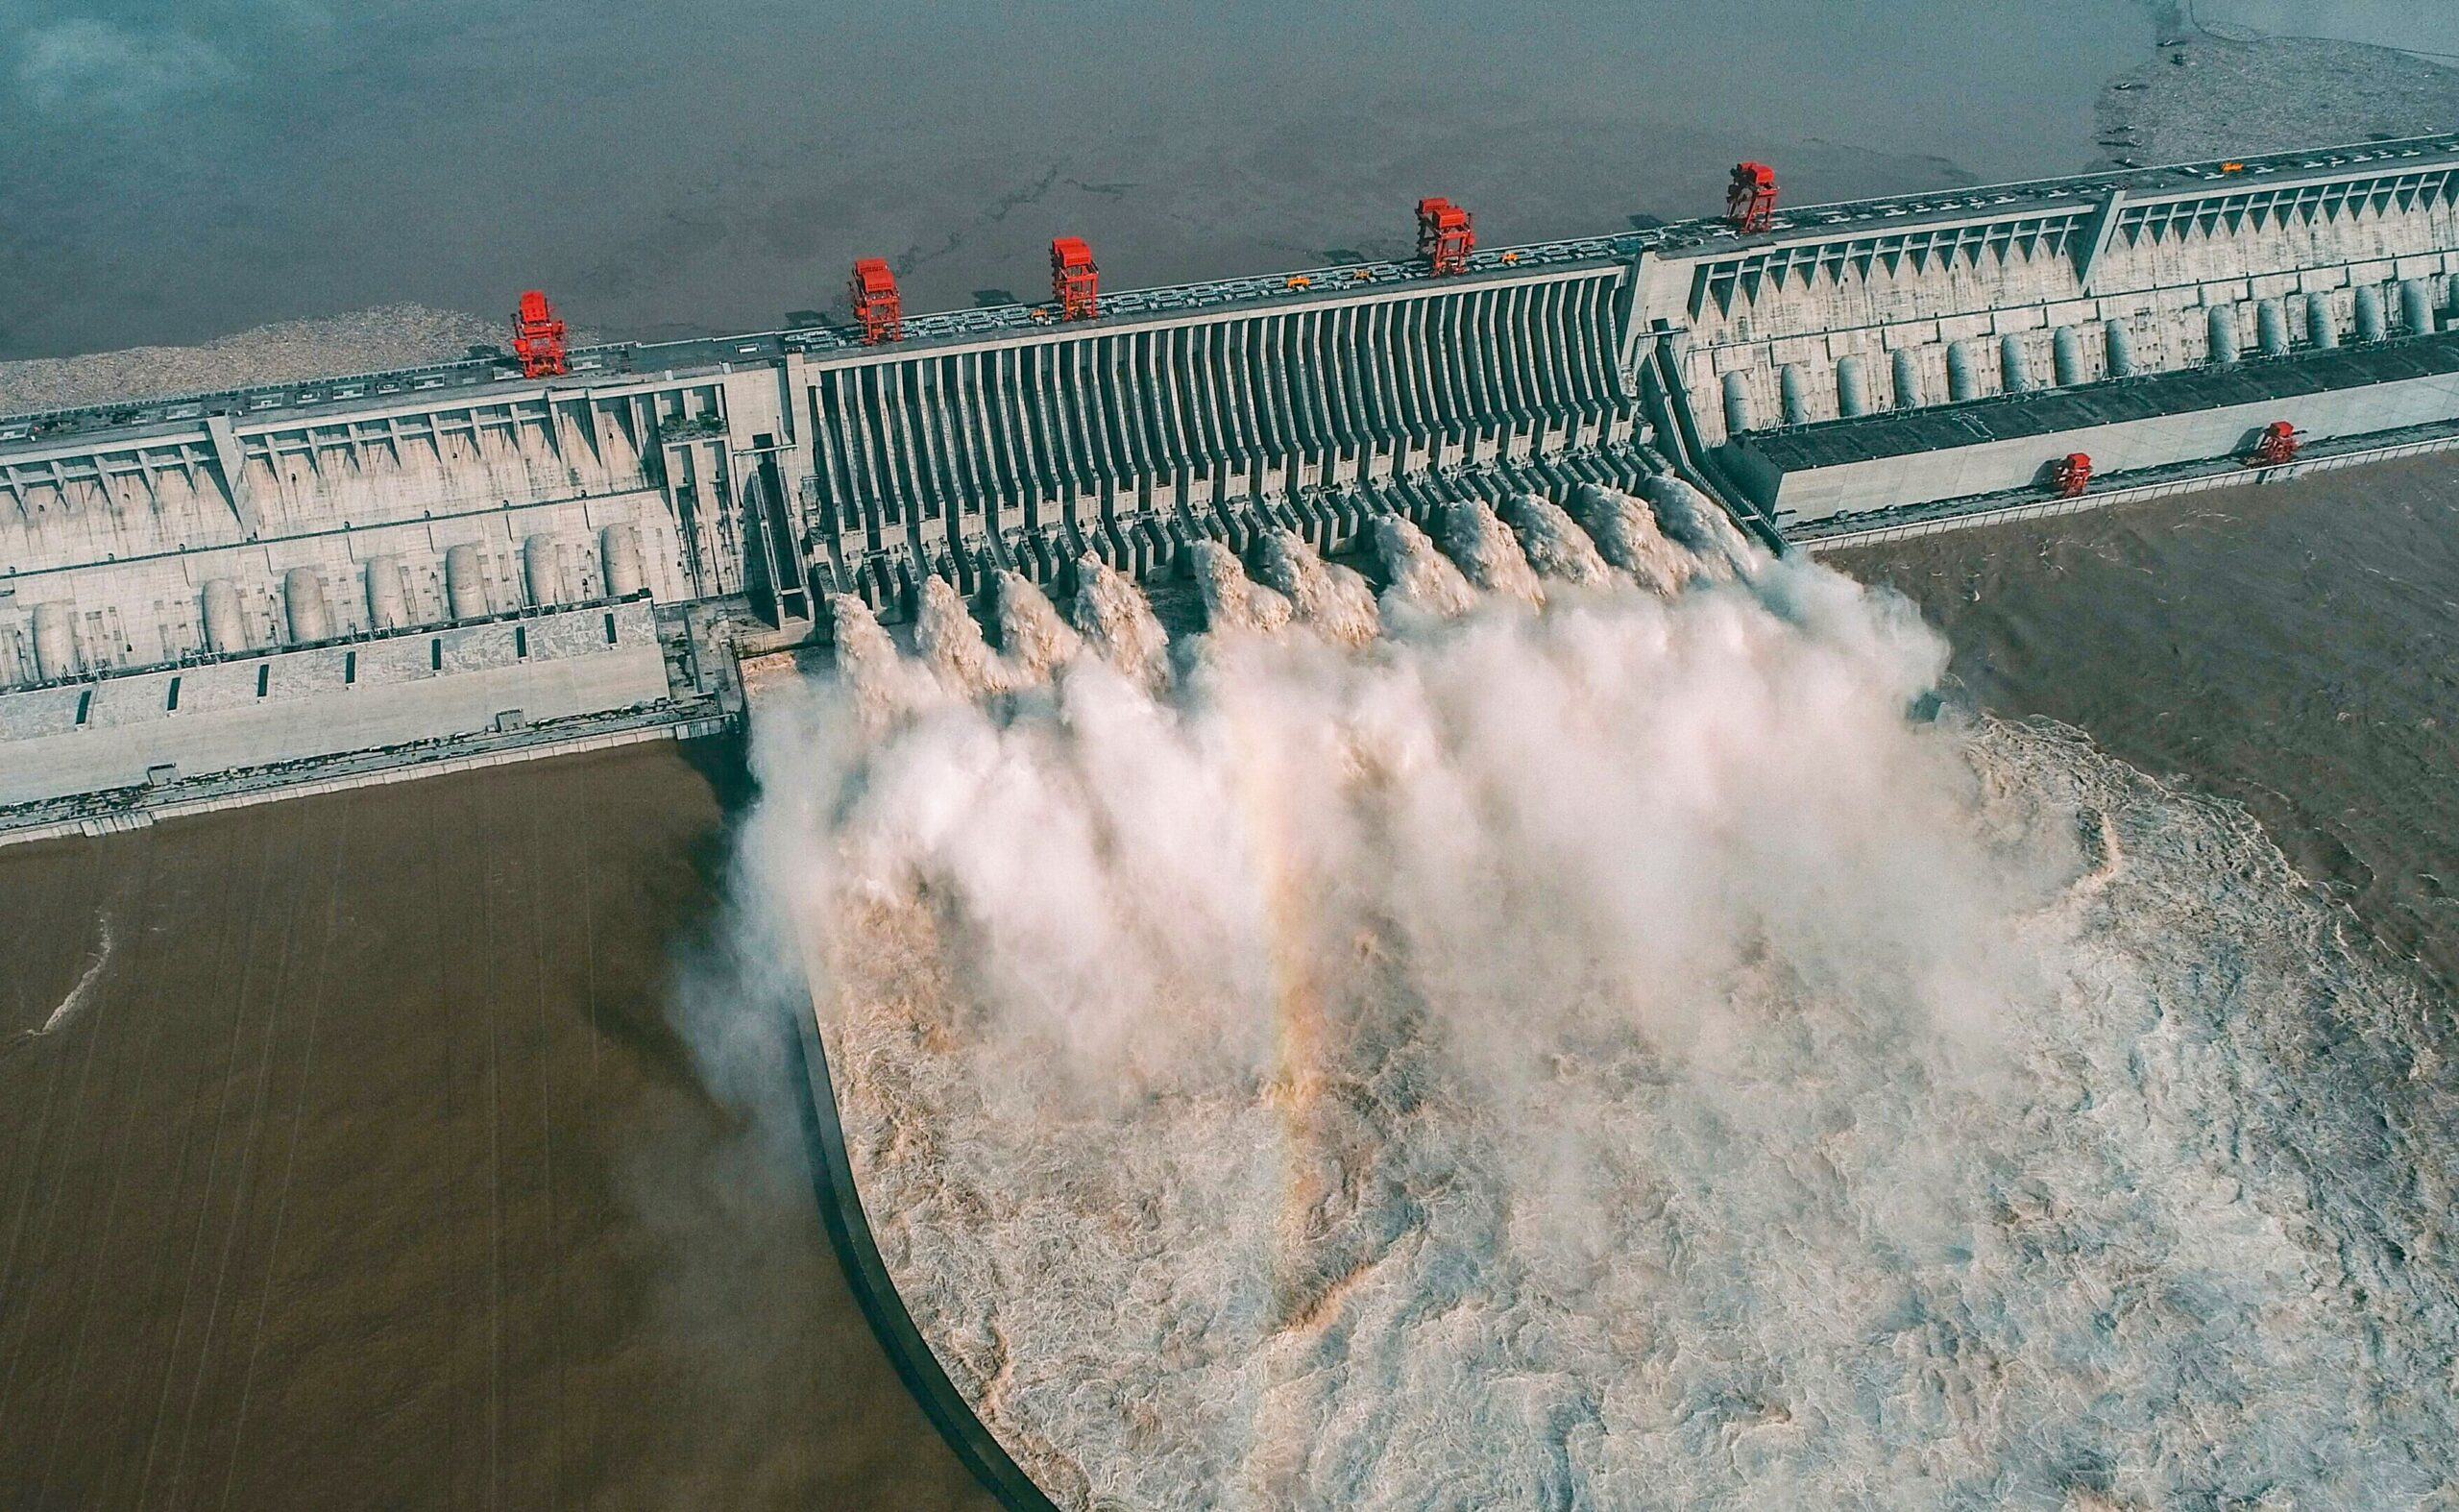 Aerial shot of hydropower station a key area for renewable energy jobs